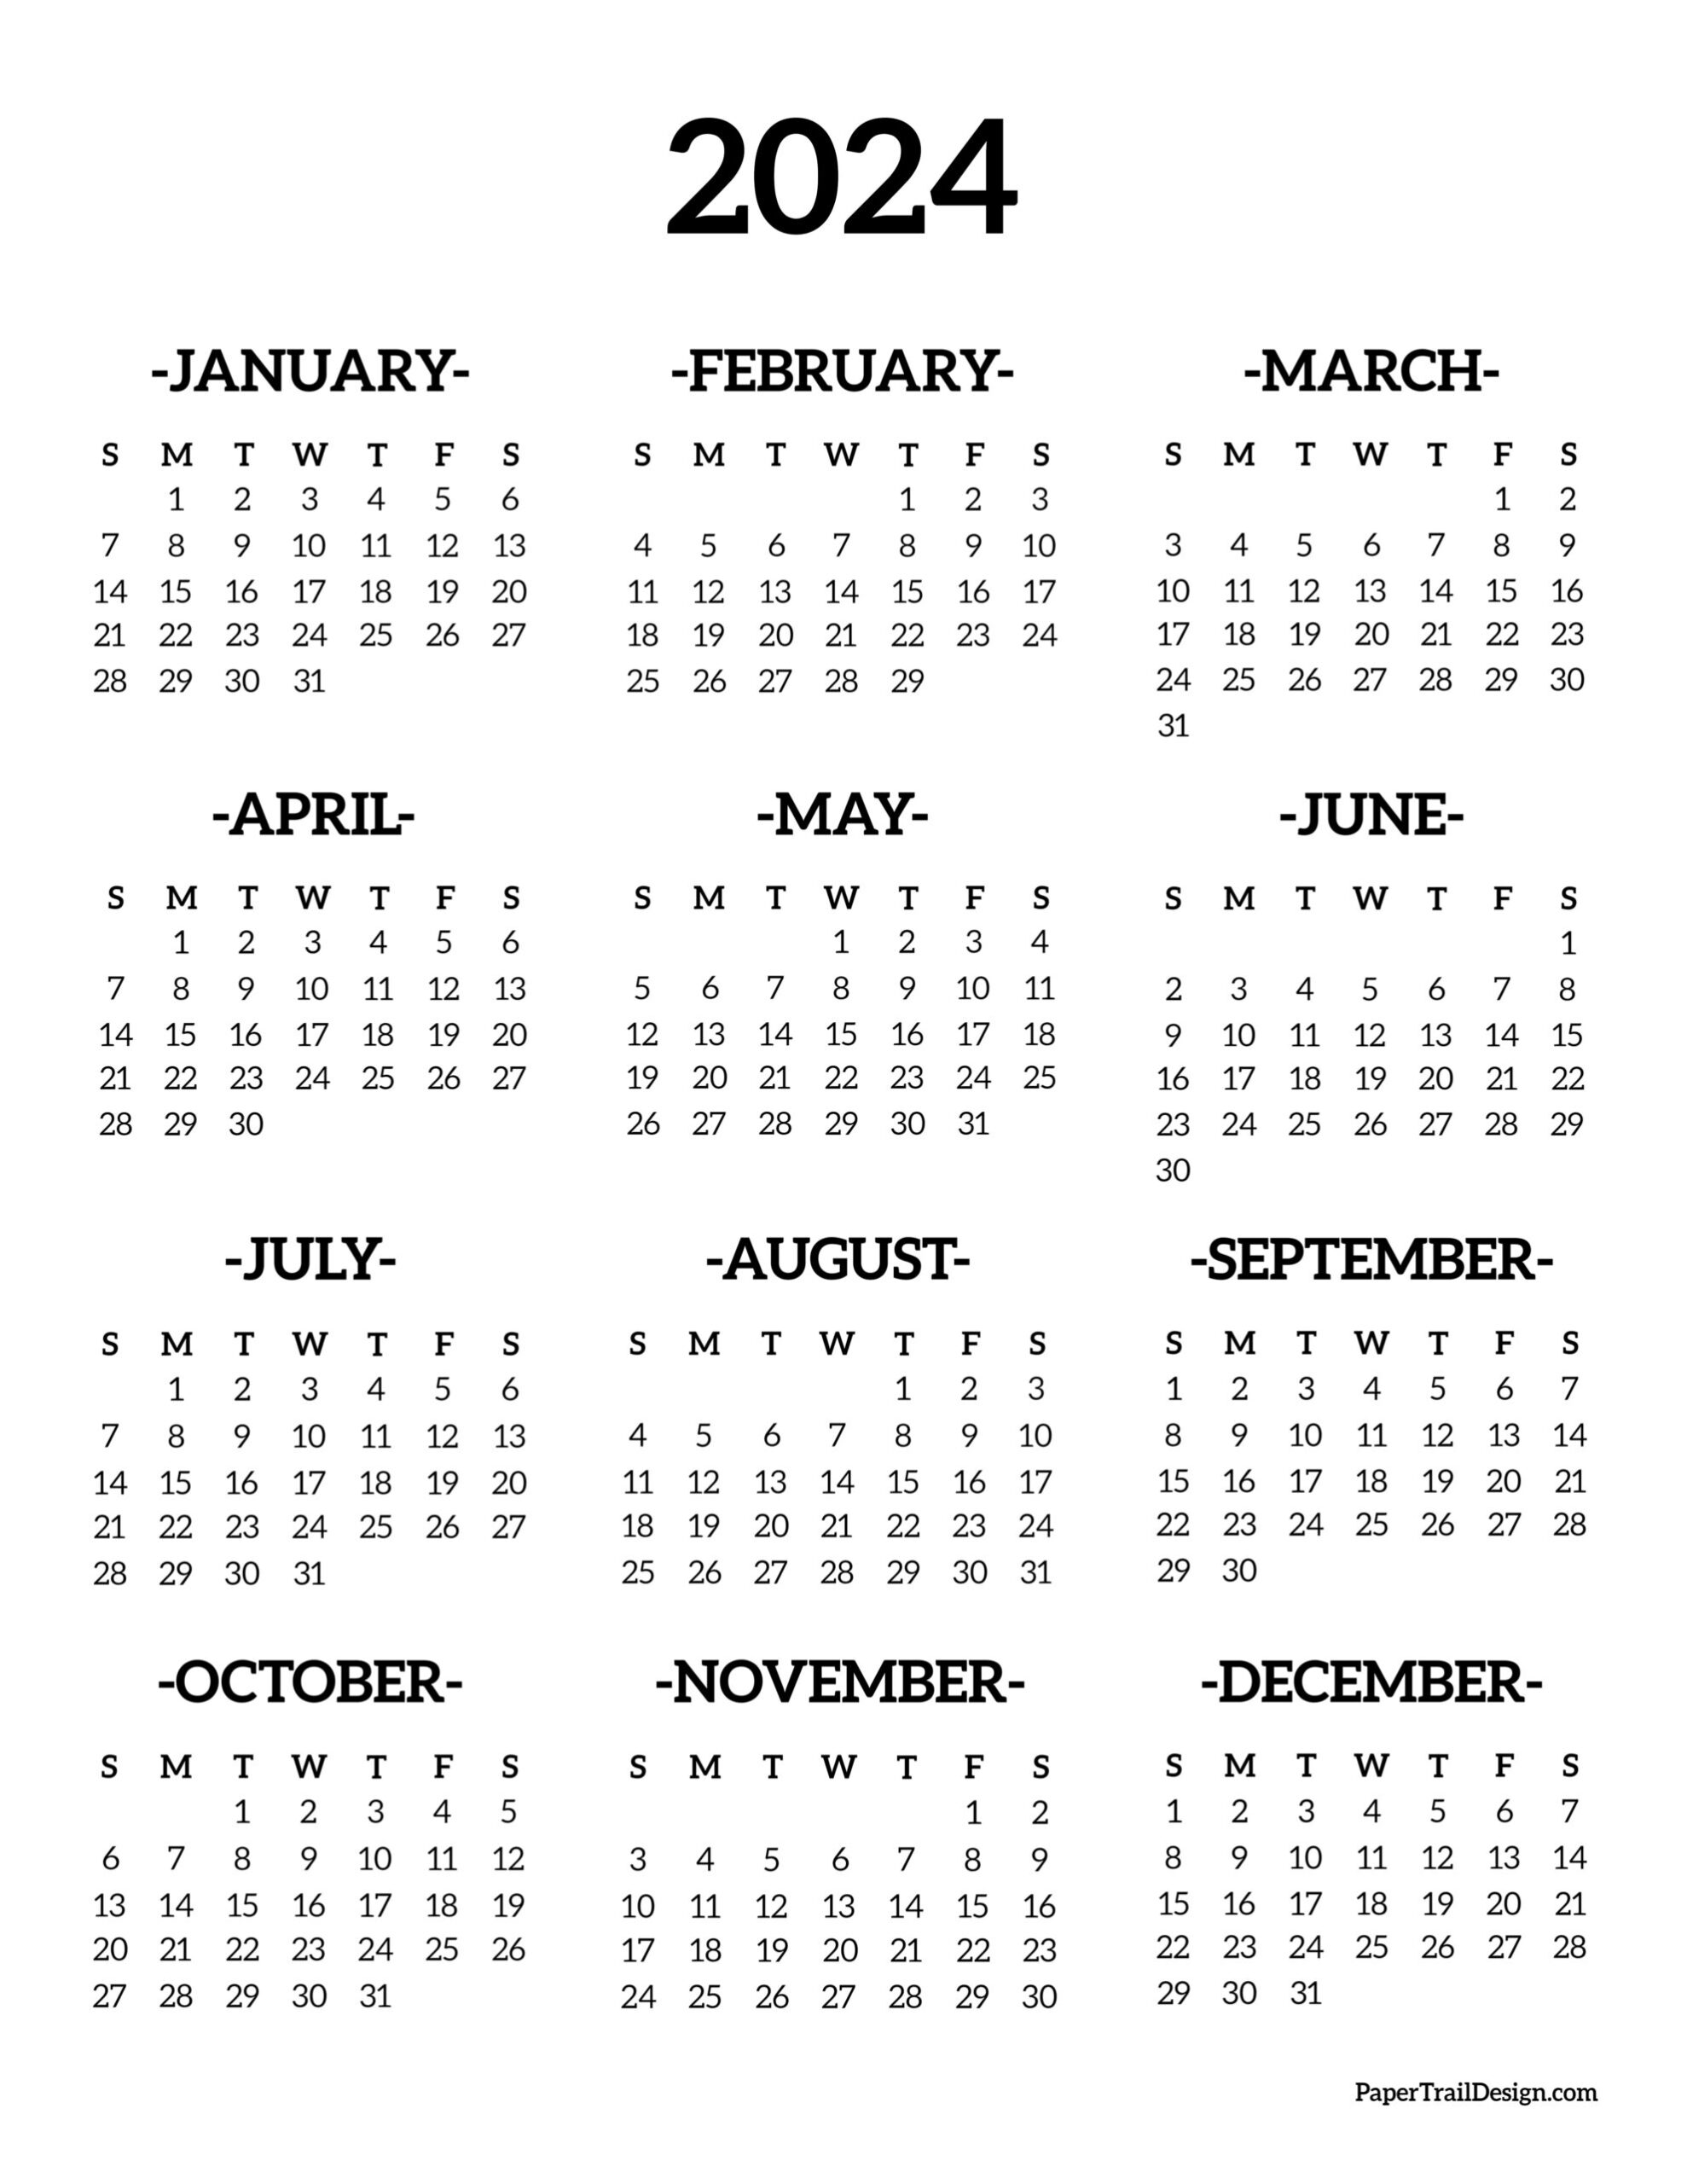 Calendar 2024 Printable One Page - Paper Trail Design for Printable 2024 Calendar One Page